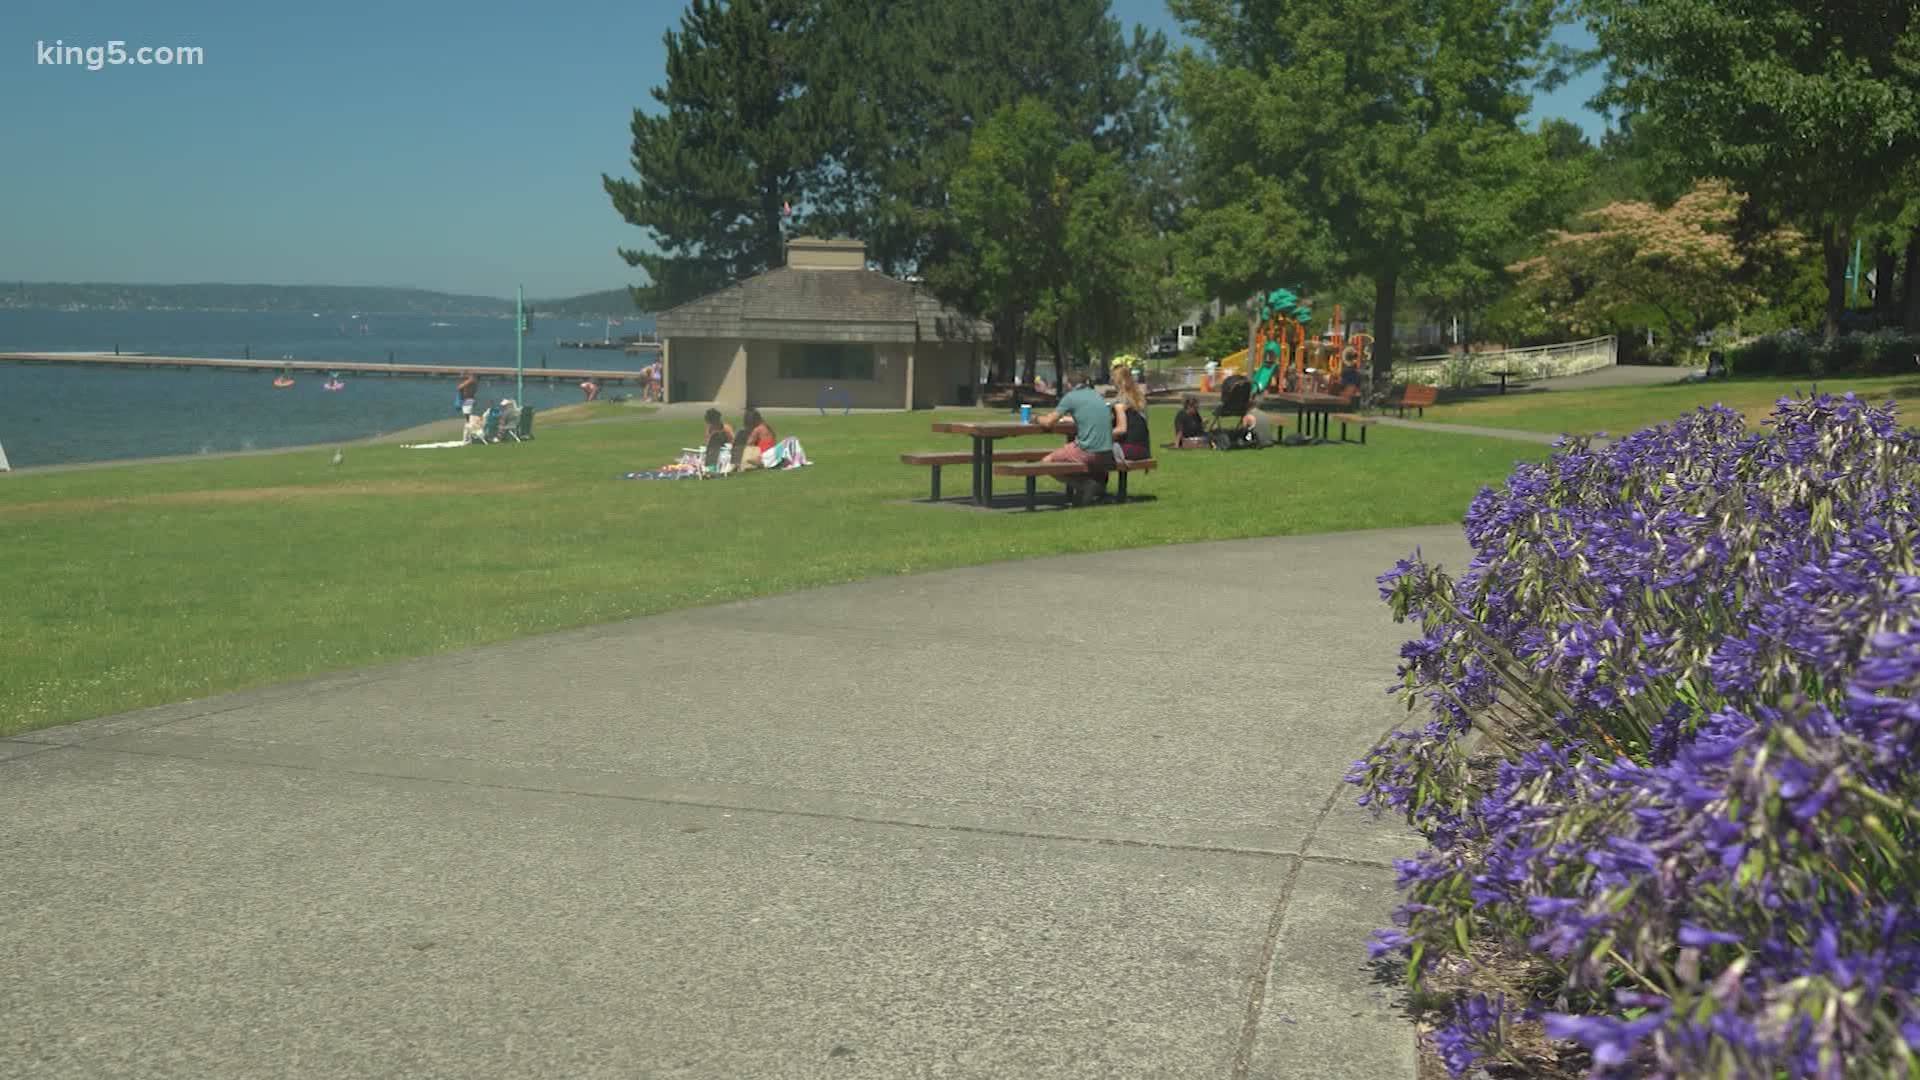 Starting Wednesday, city crews will lock the parking lot at Houghton Beach Park and block access to the dock. The dock will also be closed at David Brink Park.